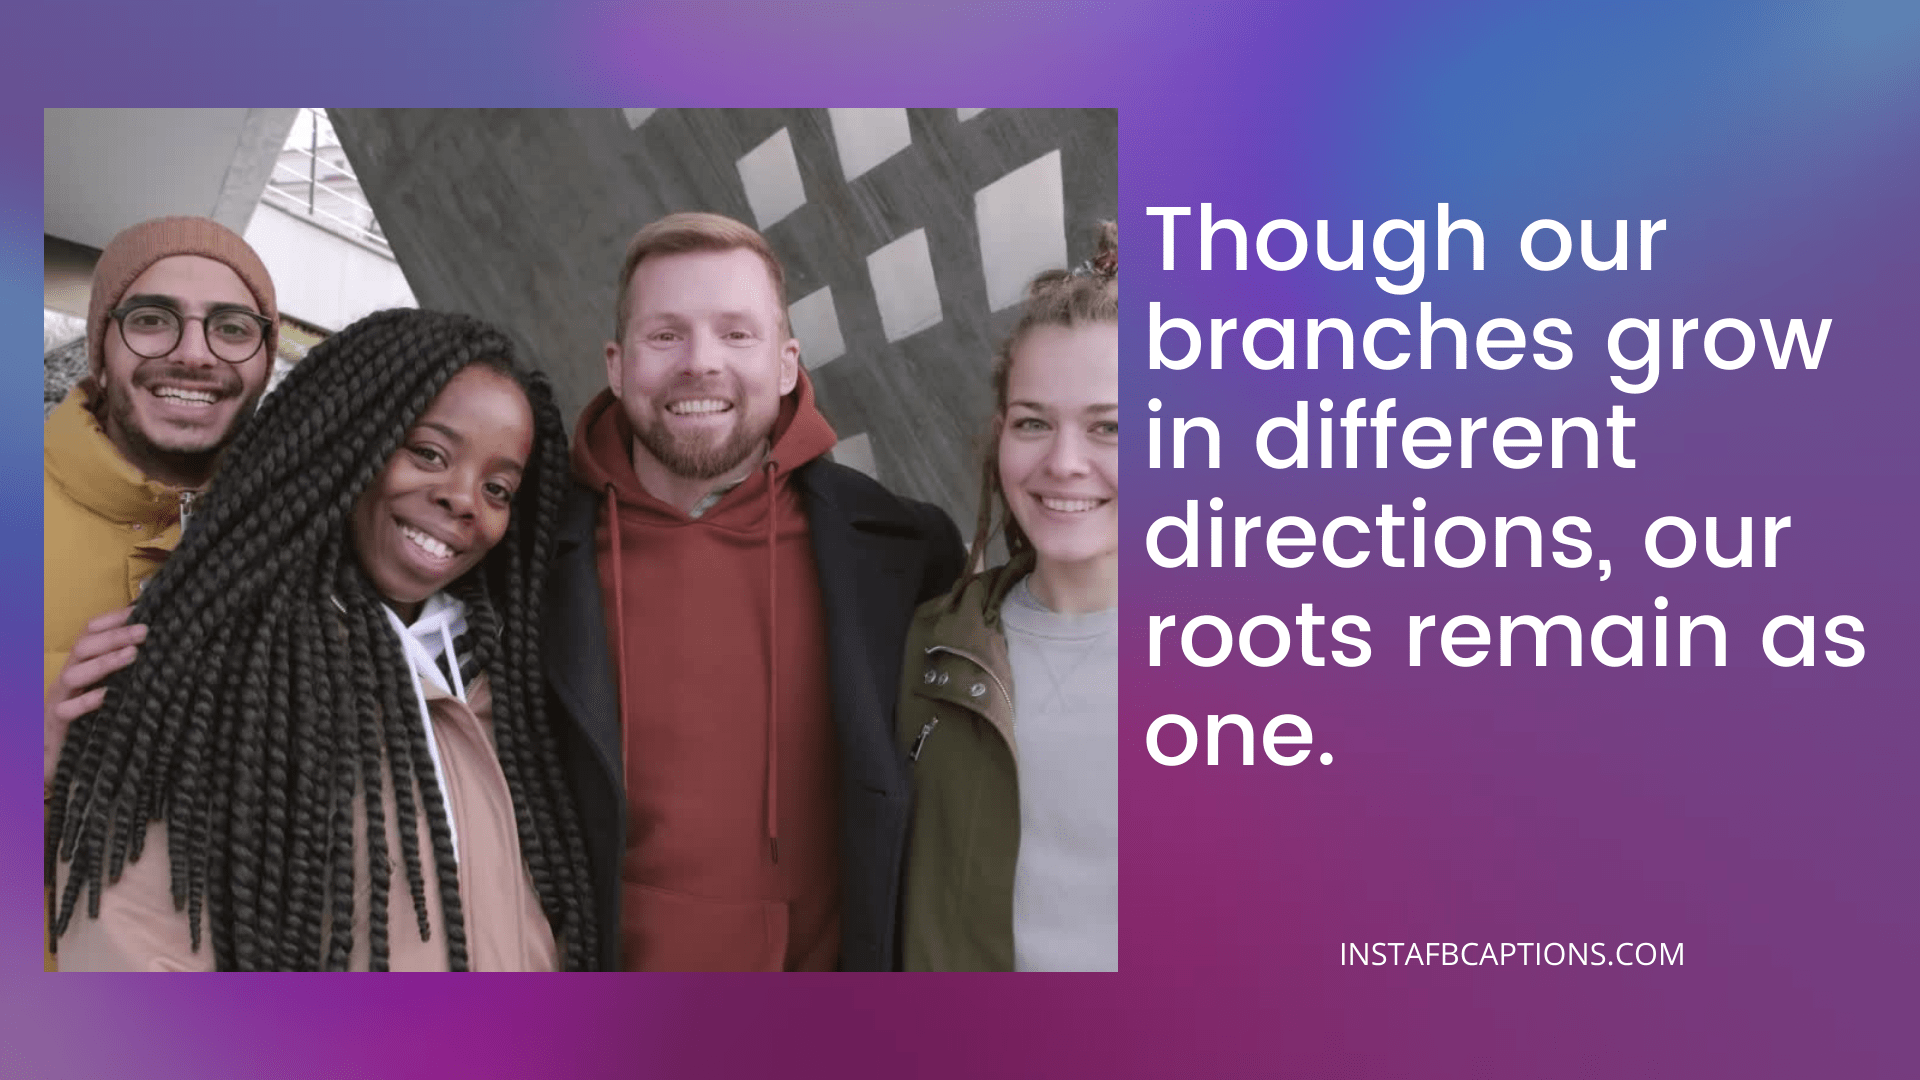 Though our branches grow in different directions, our roots remain as one. last day of college captions for instagram - Pretty General Quotes to Use as Captions for Last Day of College Posts 1 - [New] Captions for Last Day of College Instagram Posts in 2023